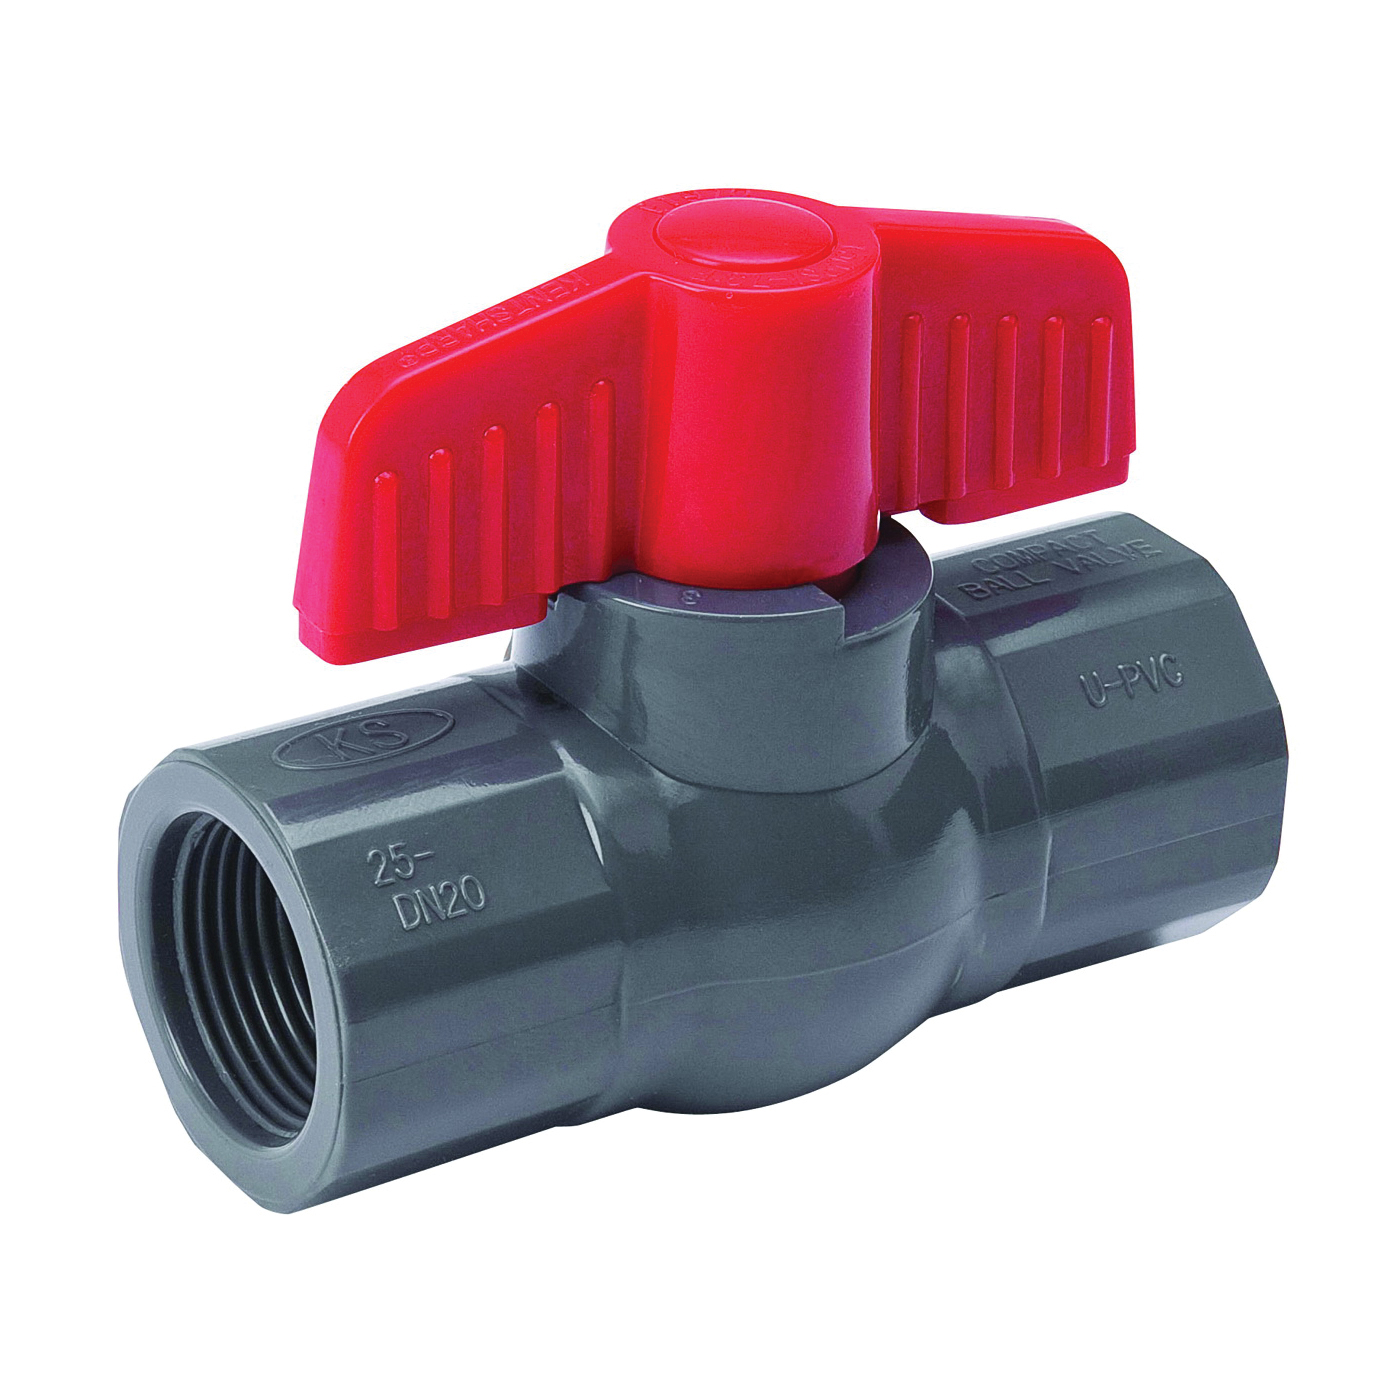 B & K 107-105 Ball Valve, 1 in Connection, FPT x FPT, 150 psi Pressure, PVC Body